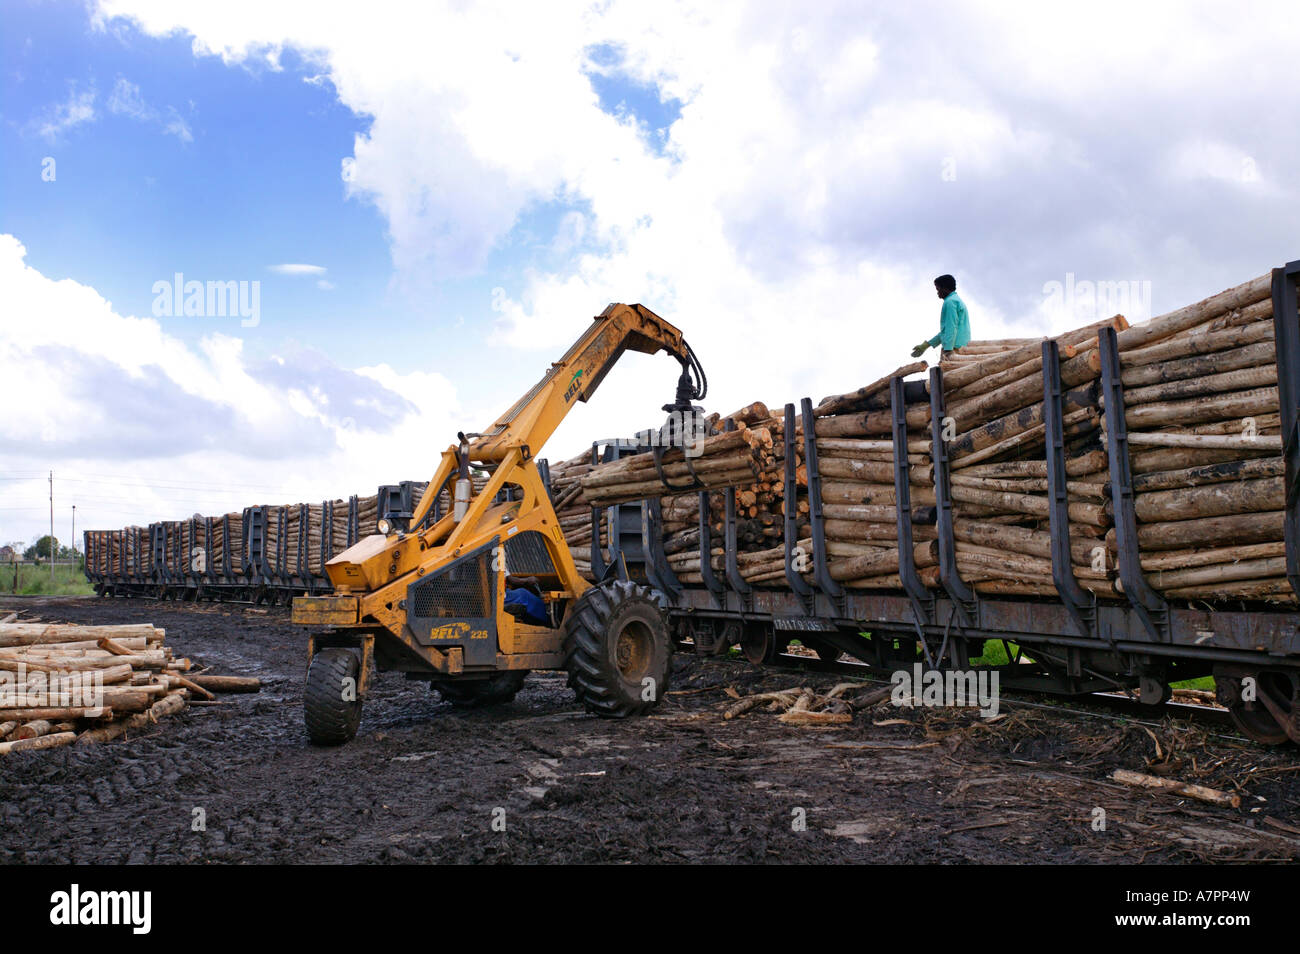 Logs being loaded onto a train to be transported to a processing plant Graskop Mpumalanga South Africa Stock Photo